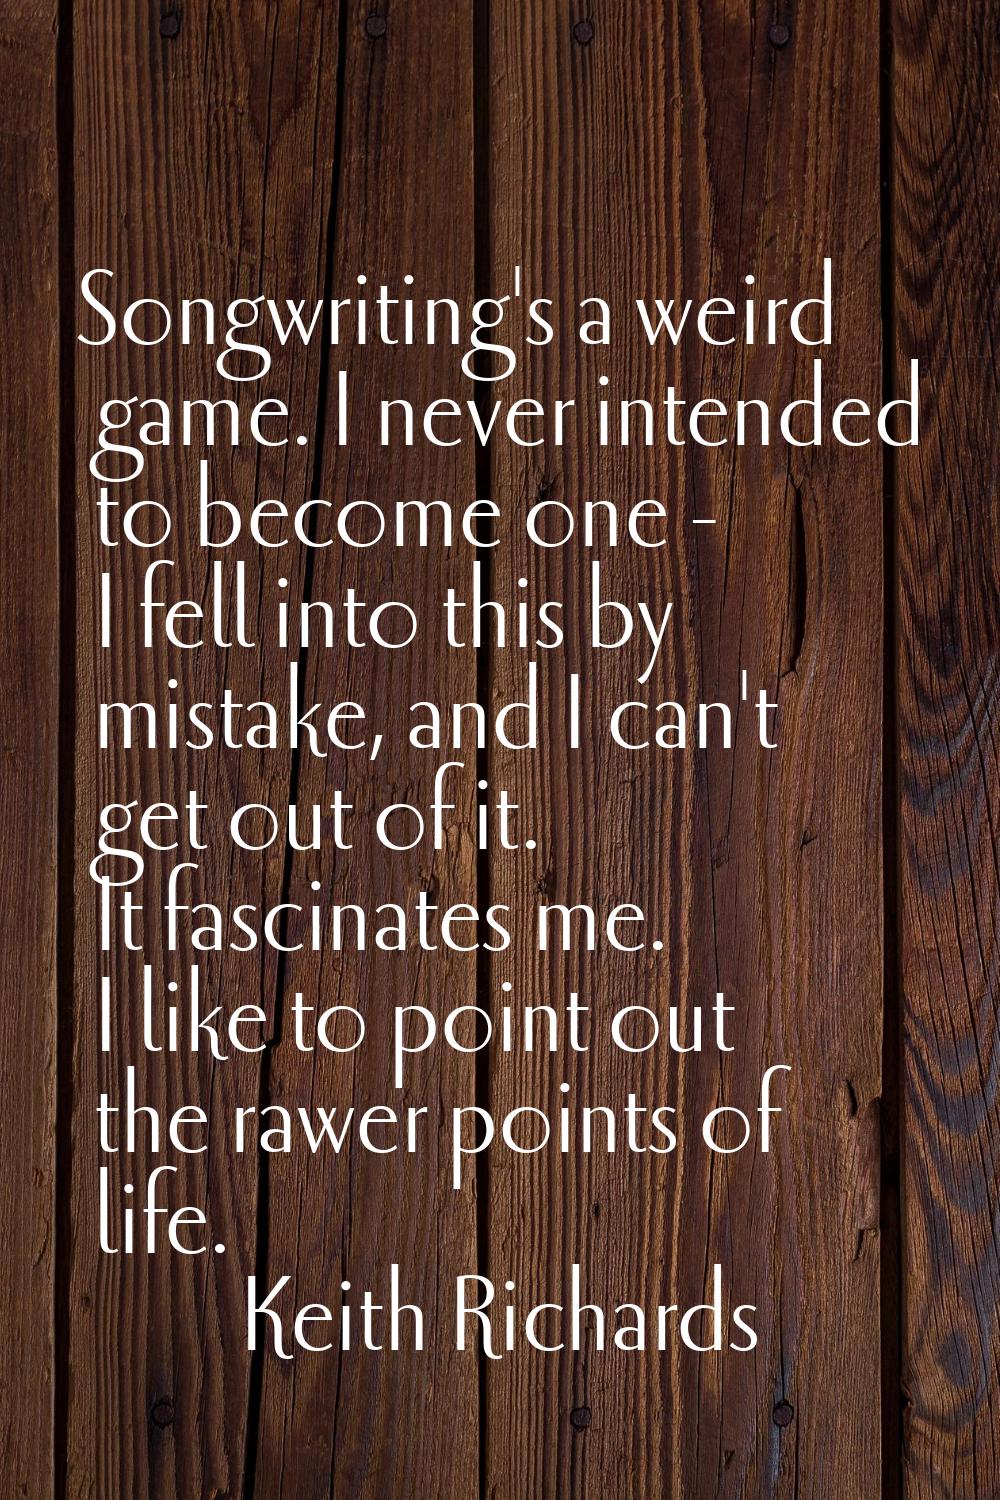 Songwriting's a weird game. I never intended to become one - I fell into this by mistake, and I can